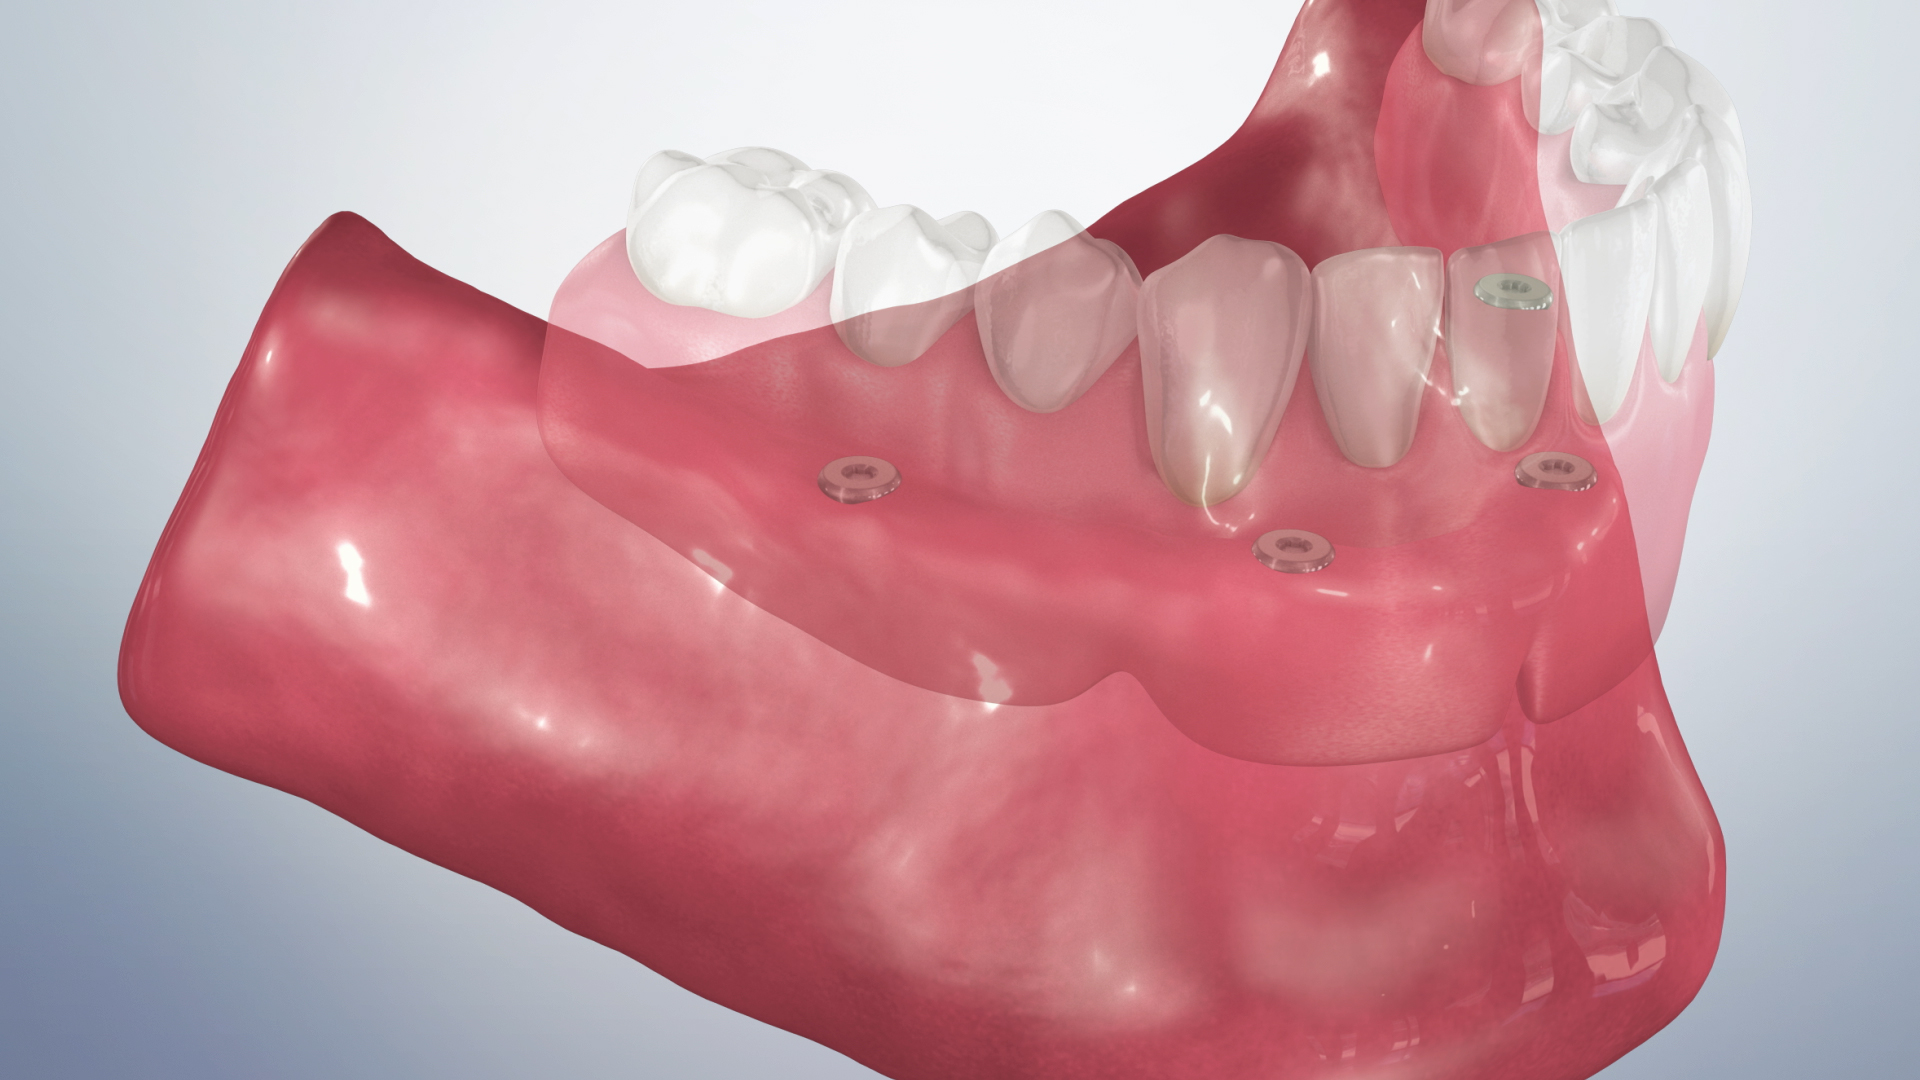 Thumbnail for a video on Post-Operative Instructions for a Bar-Retained Overdenture